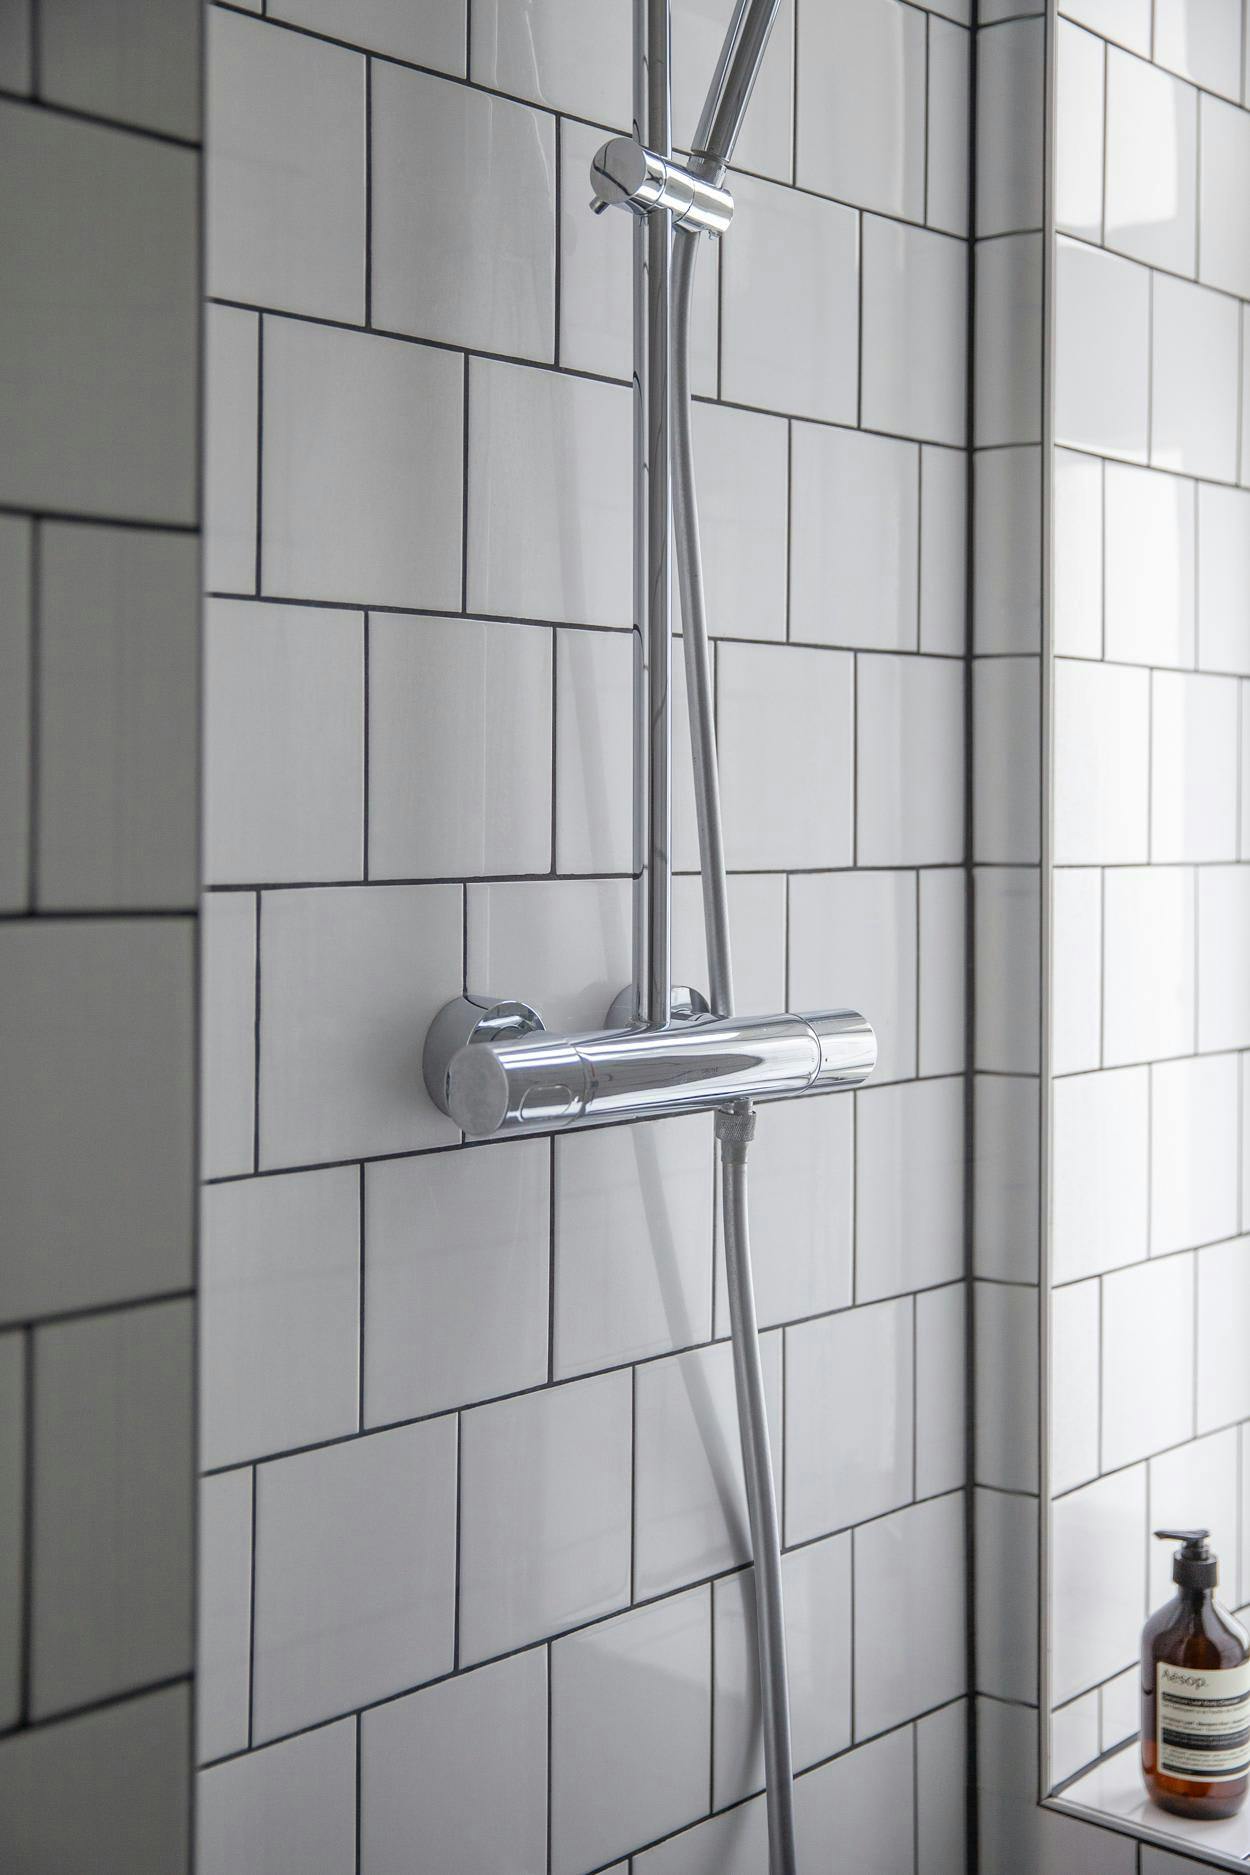 The image features a modern bathroom with a shower stall, a glass shower head, and a tiled wall.